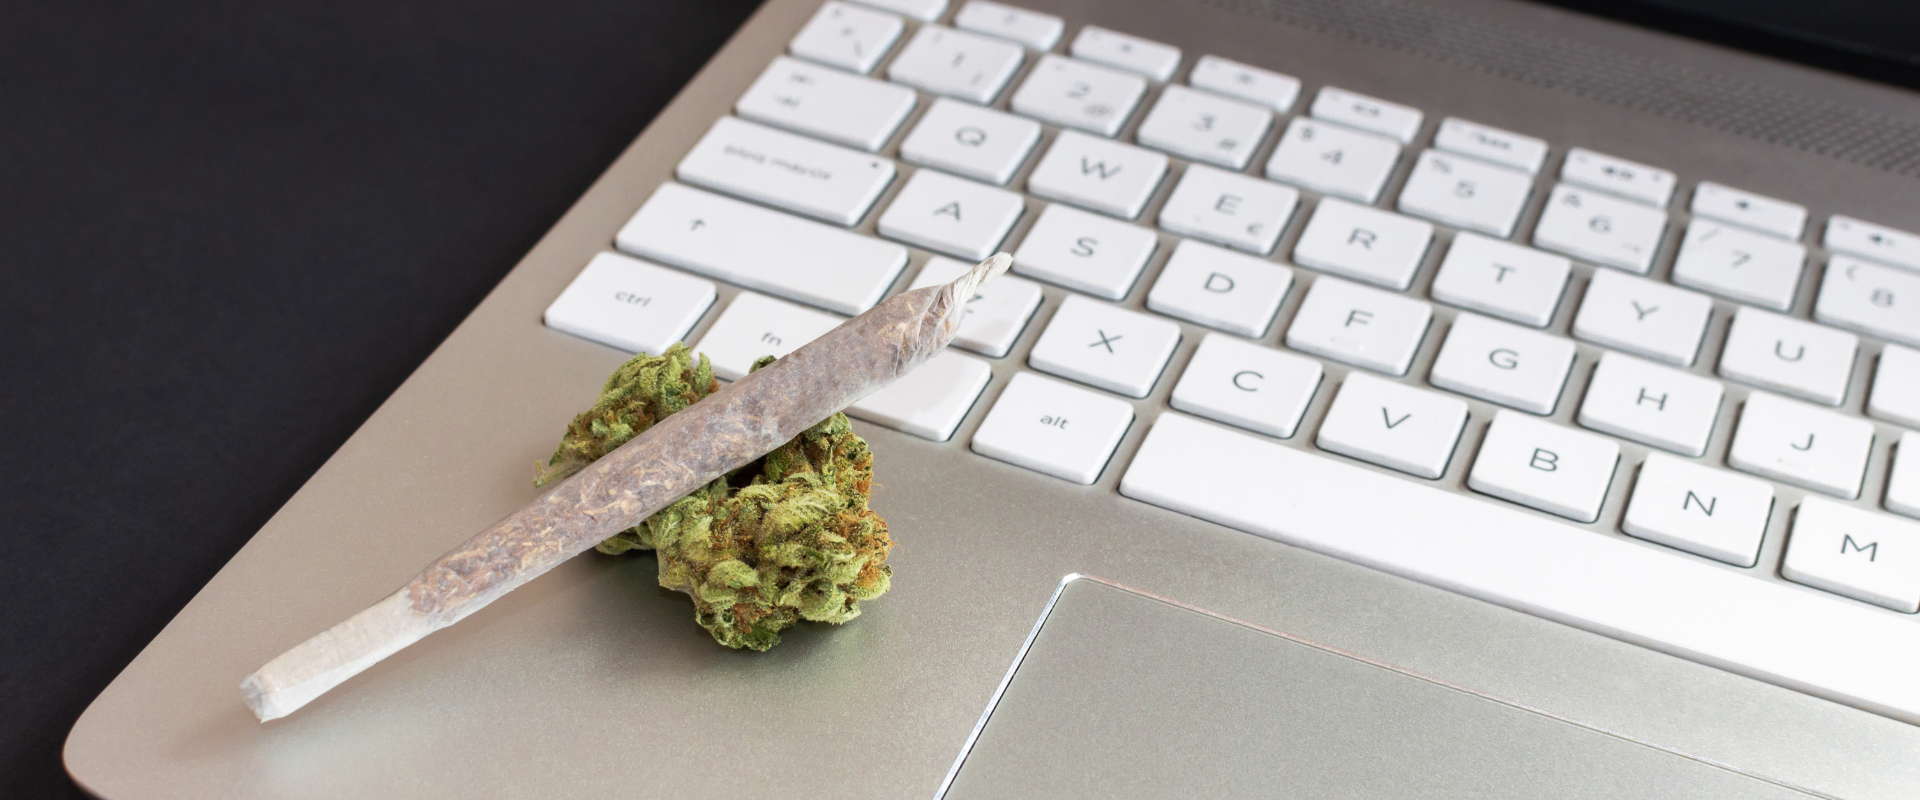 working from home and cannabis consumption 